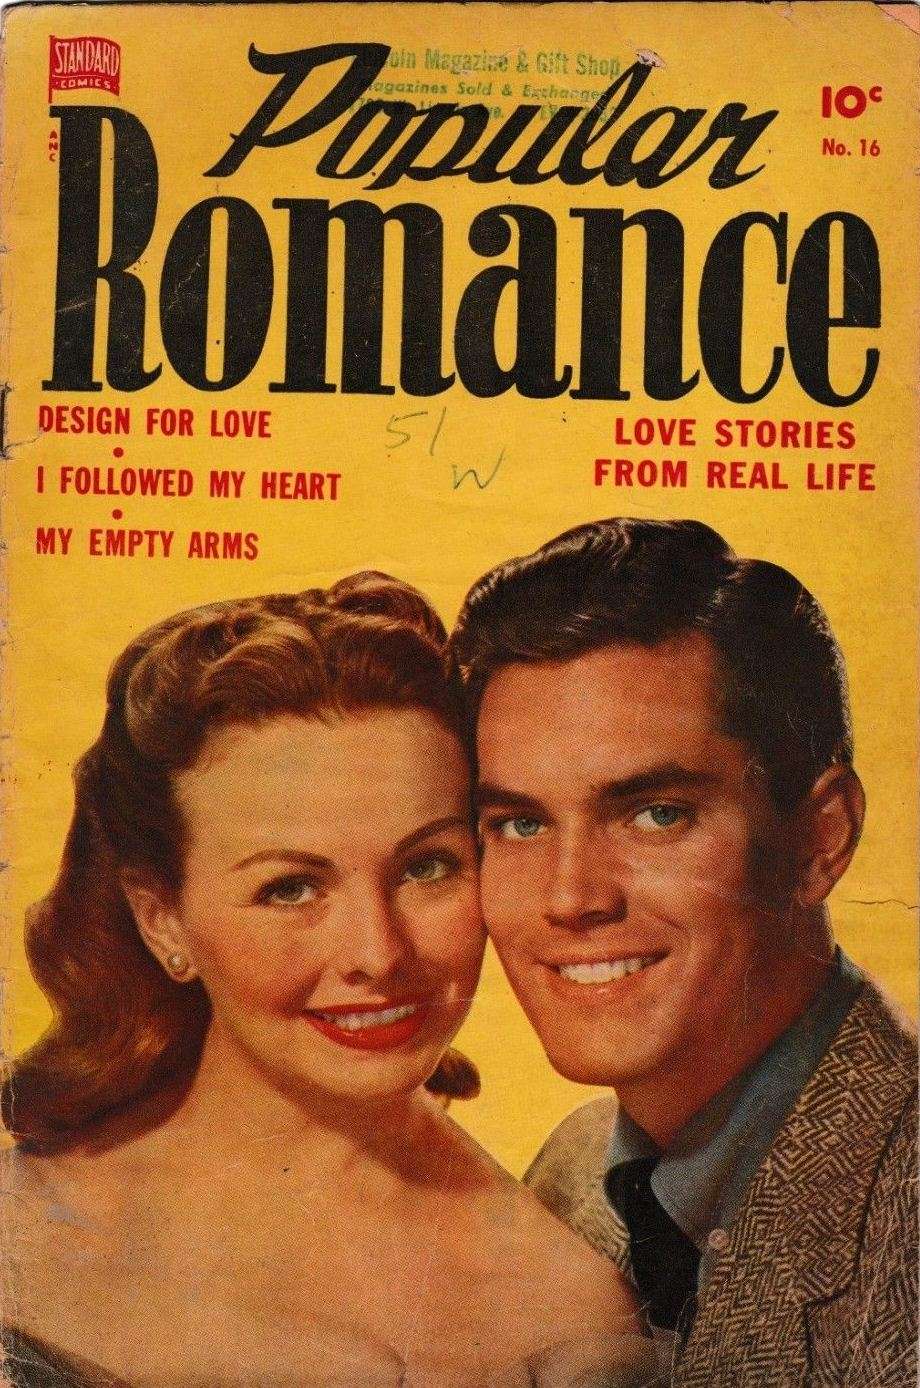 Book Cover For Popular Romance 16 - Version 1